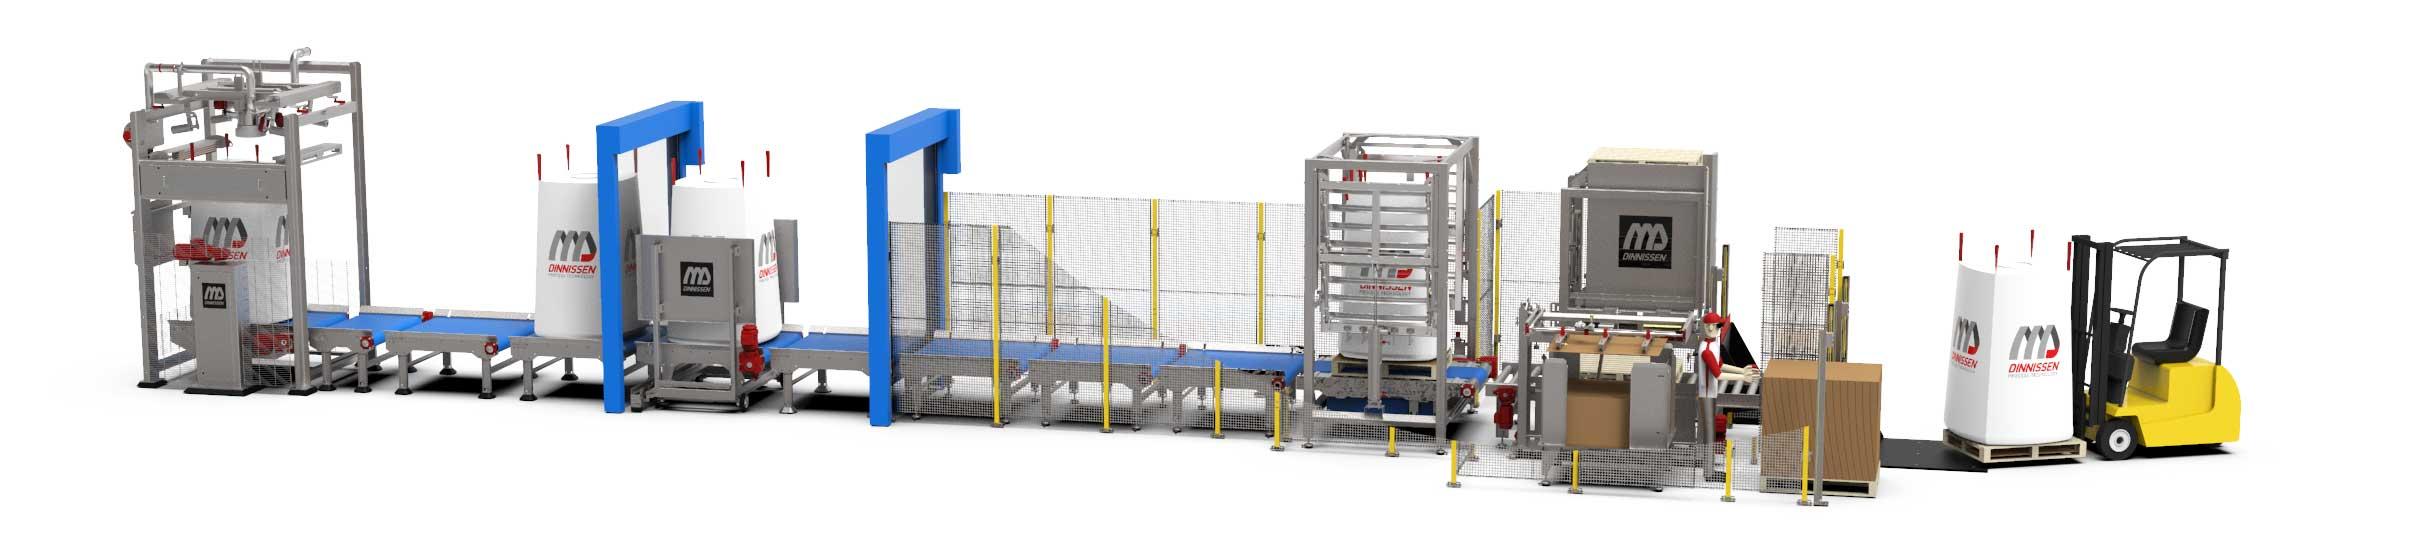 High-Care big-bag filling and palletizing